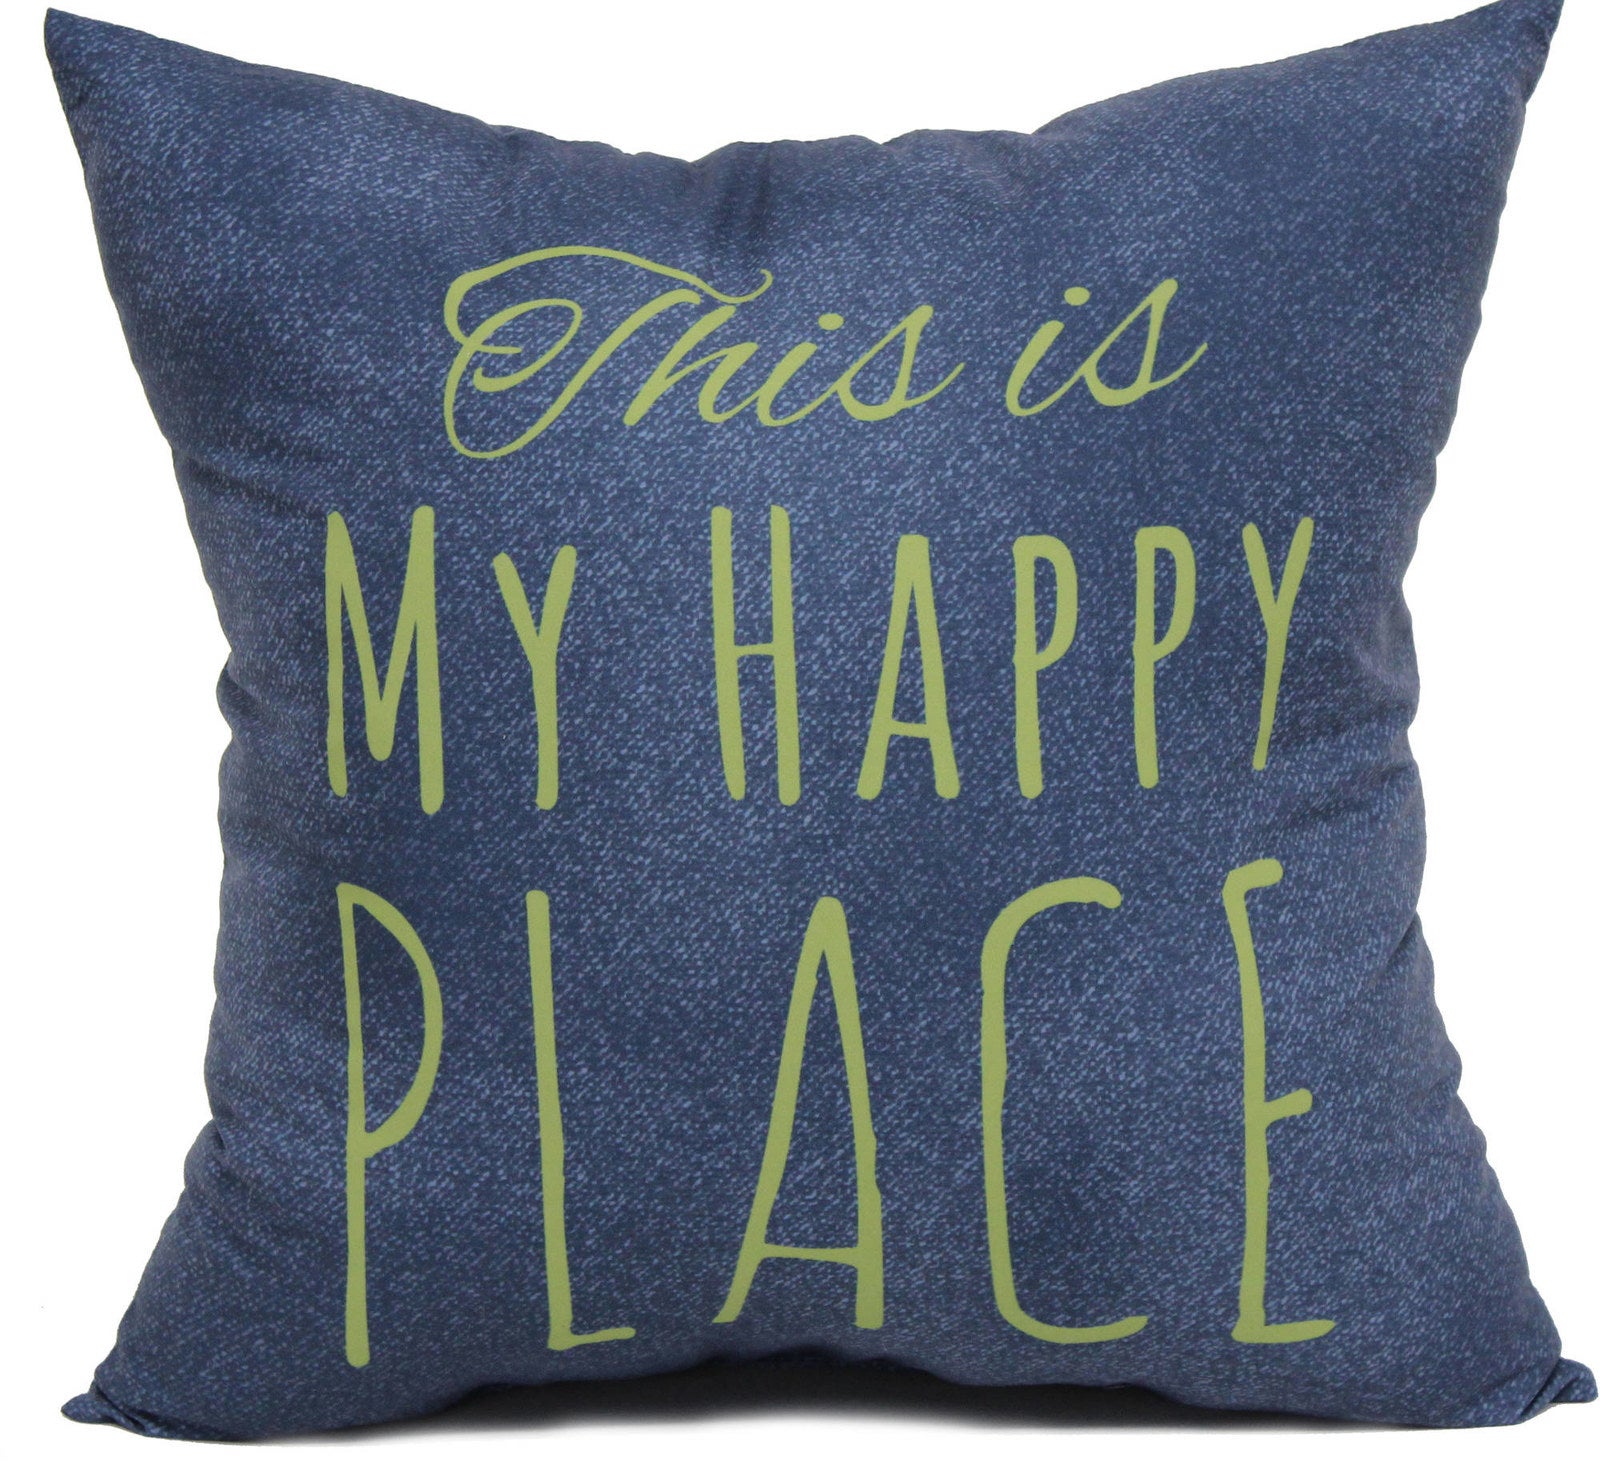 Who knew you could get a popular pillow for just $9 at Walmart?